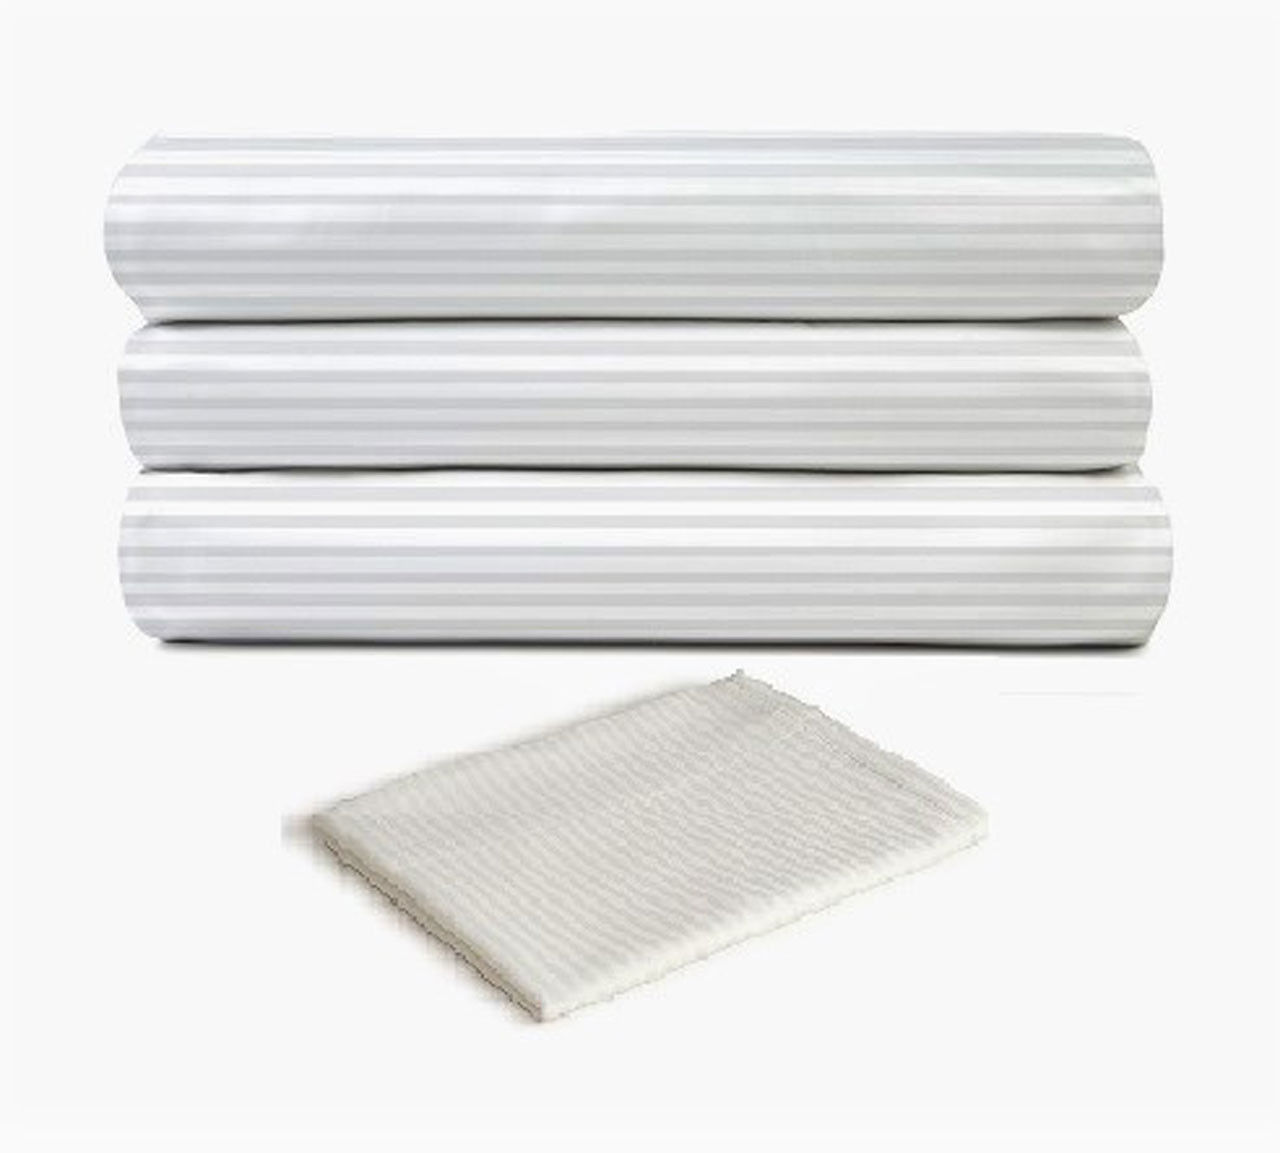 How do the hotel pillowcases wholesale by Golden Mills feel?